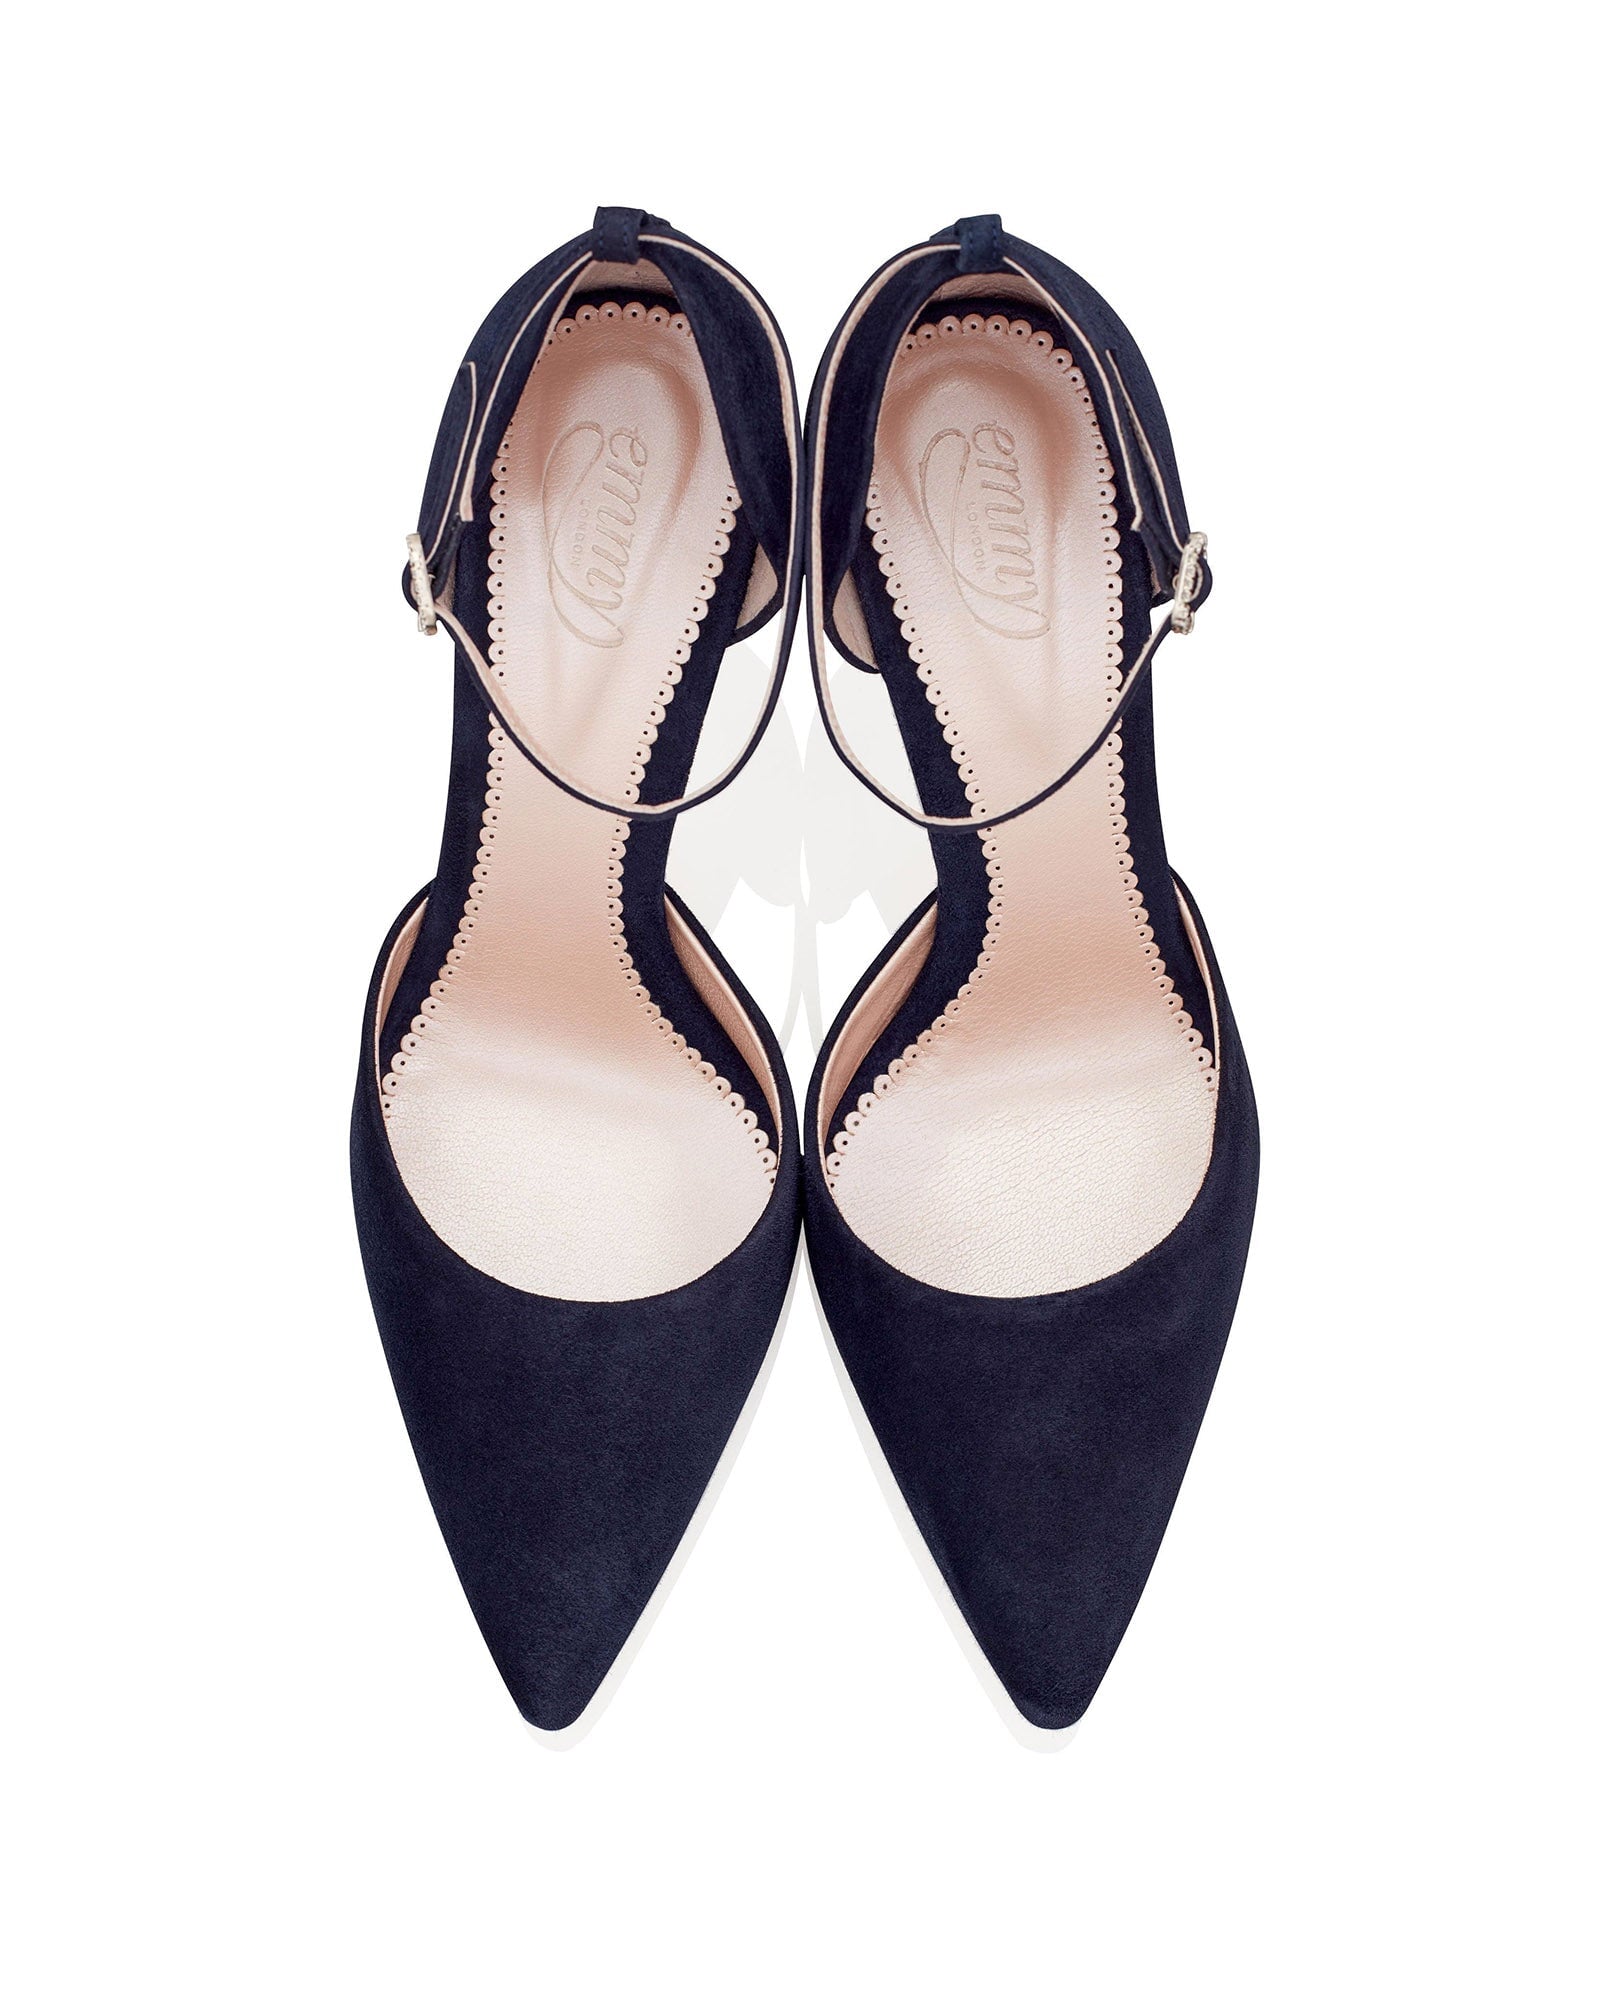 Harriet Midnight Navy Fashion Shoe Navy Blue Suede Court Shoes  image